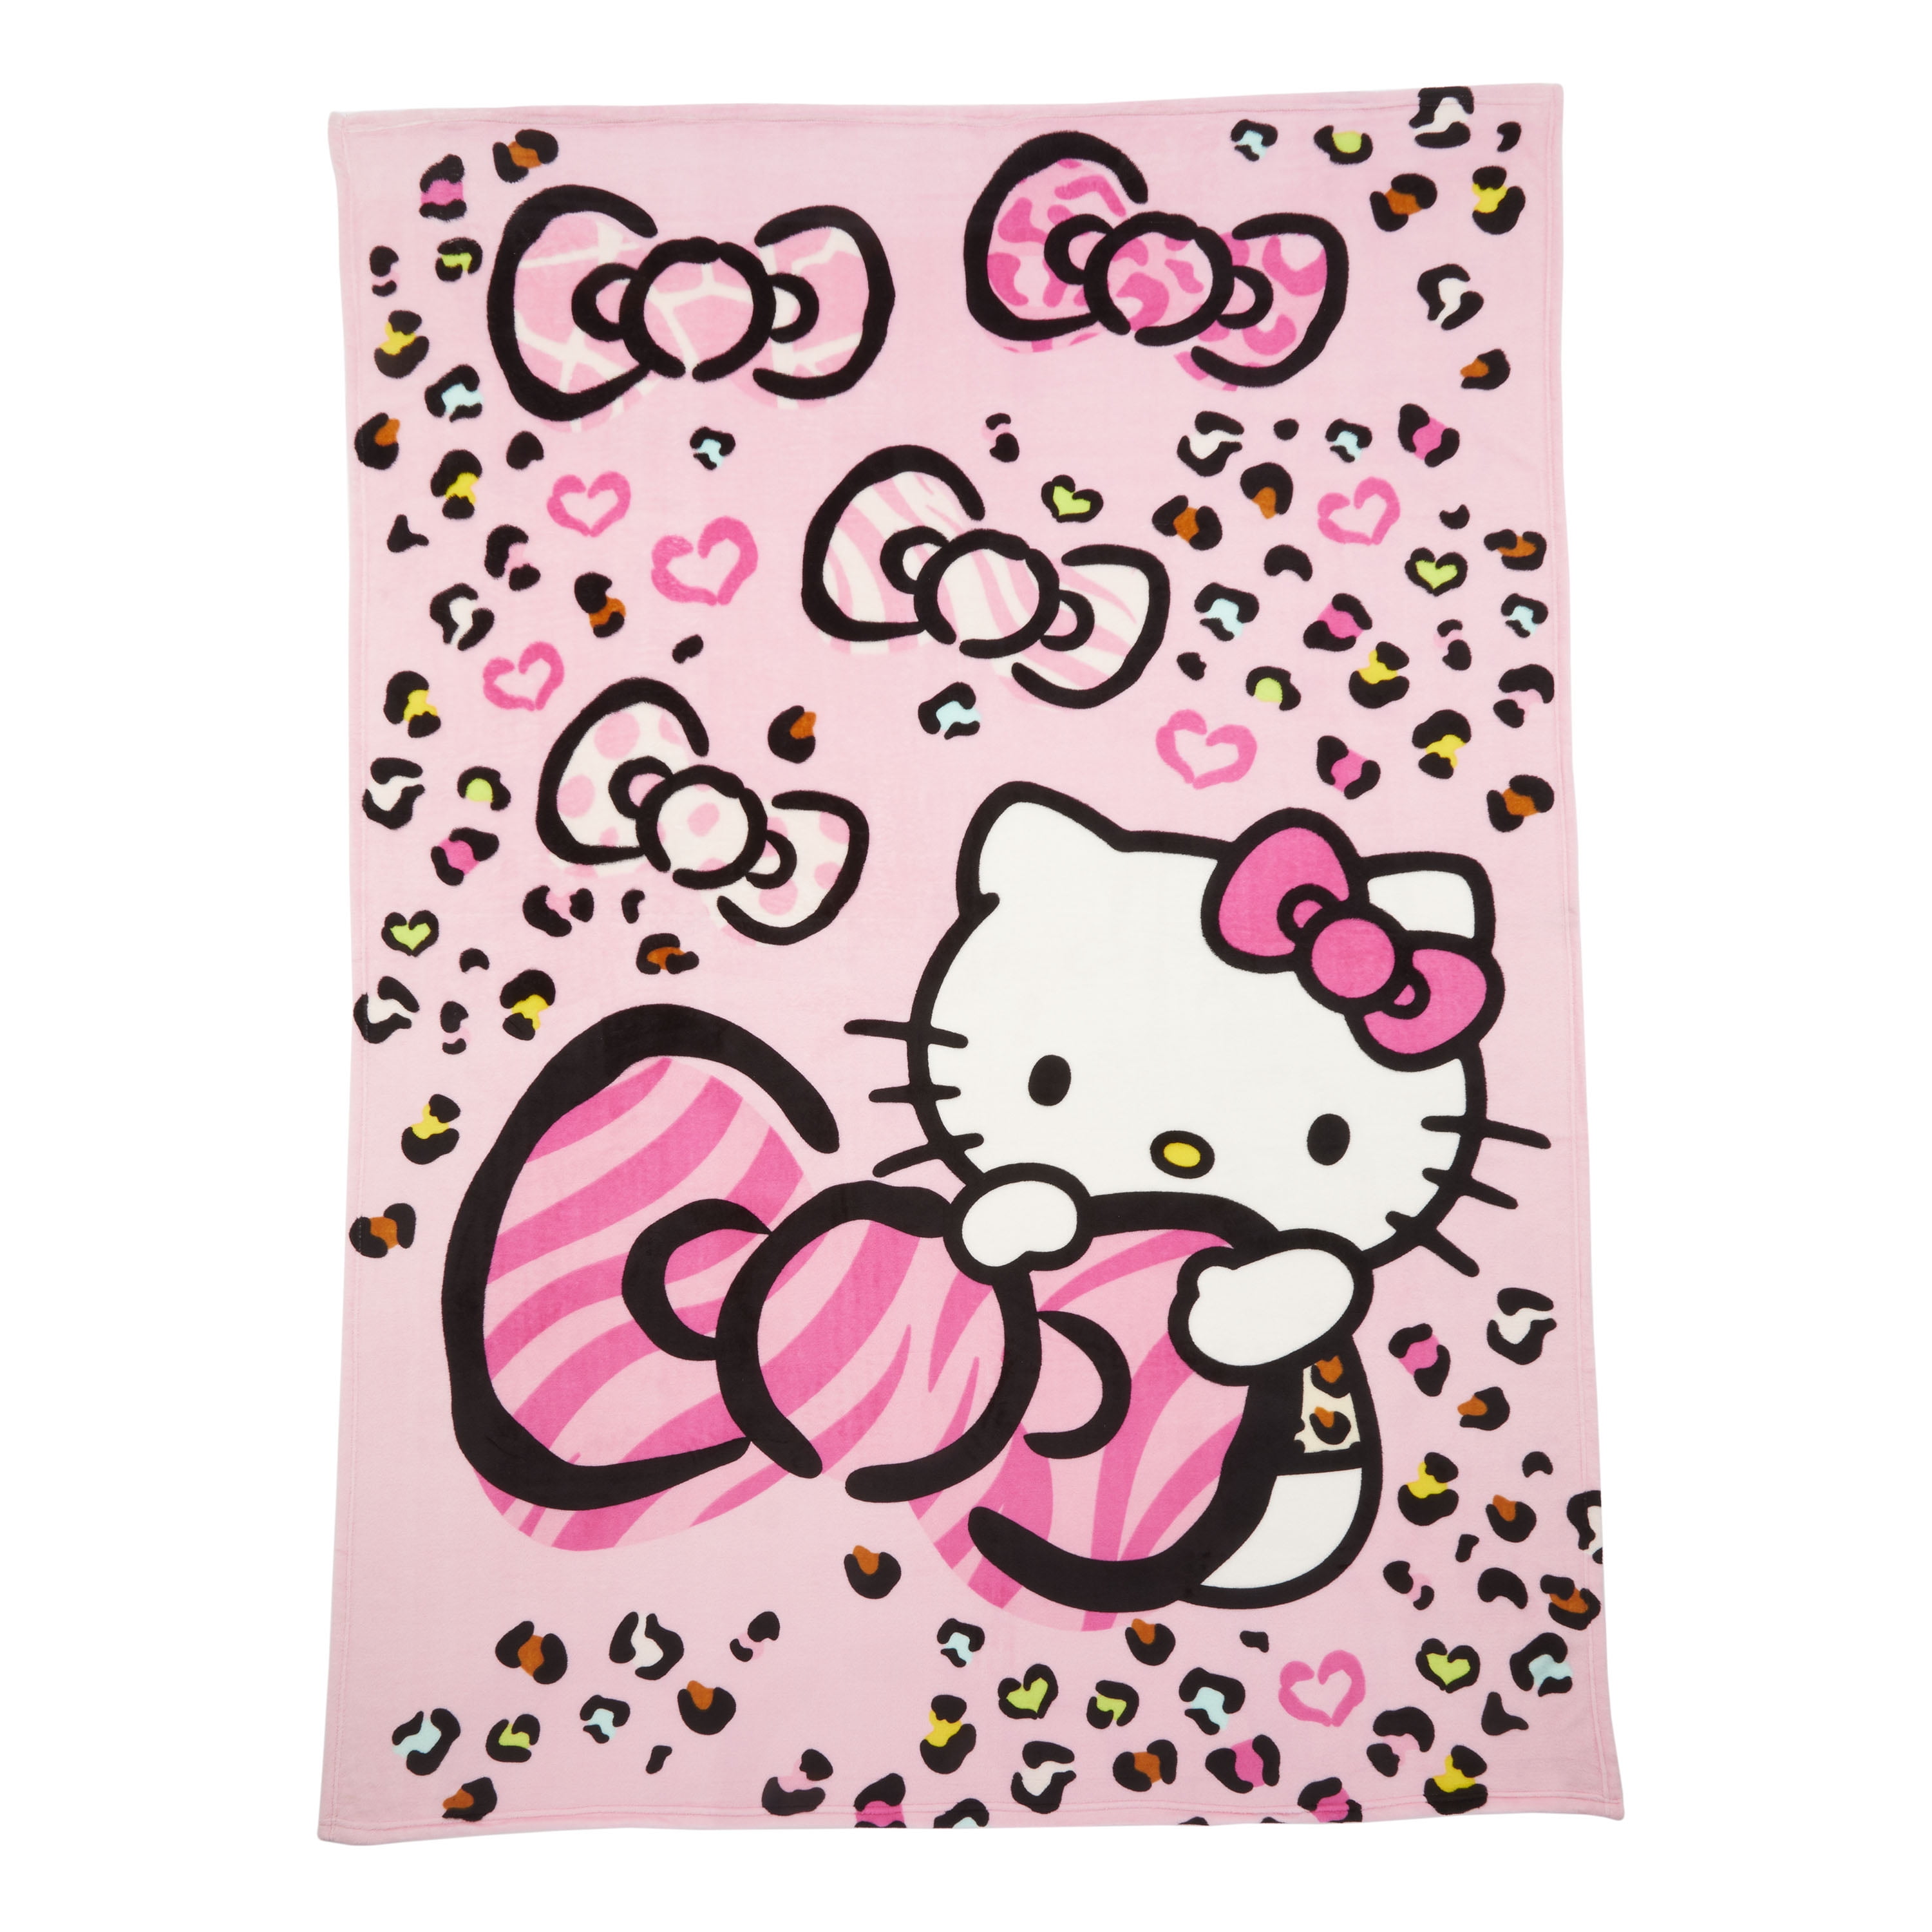 Sanrio Hello Kitty Kids and Toddlers Sofa Bean Bag Chair Made In USA 